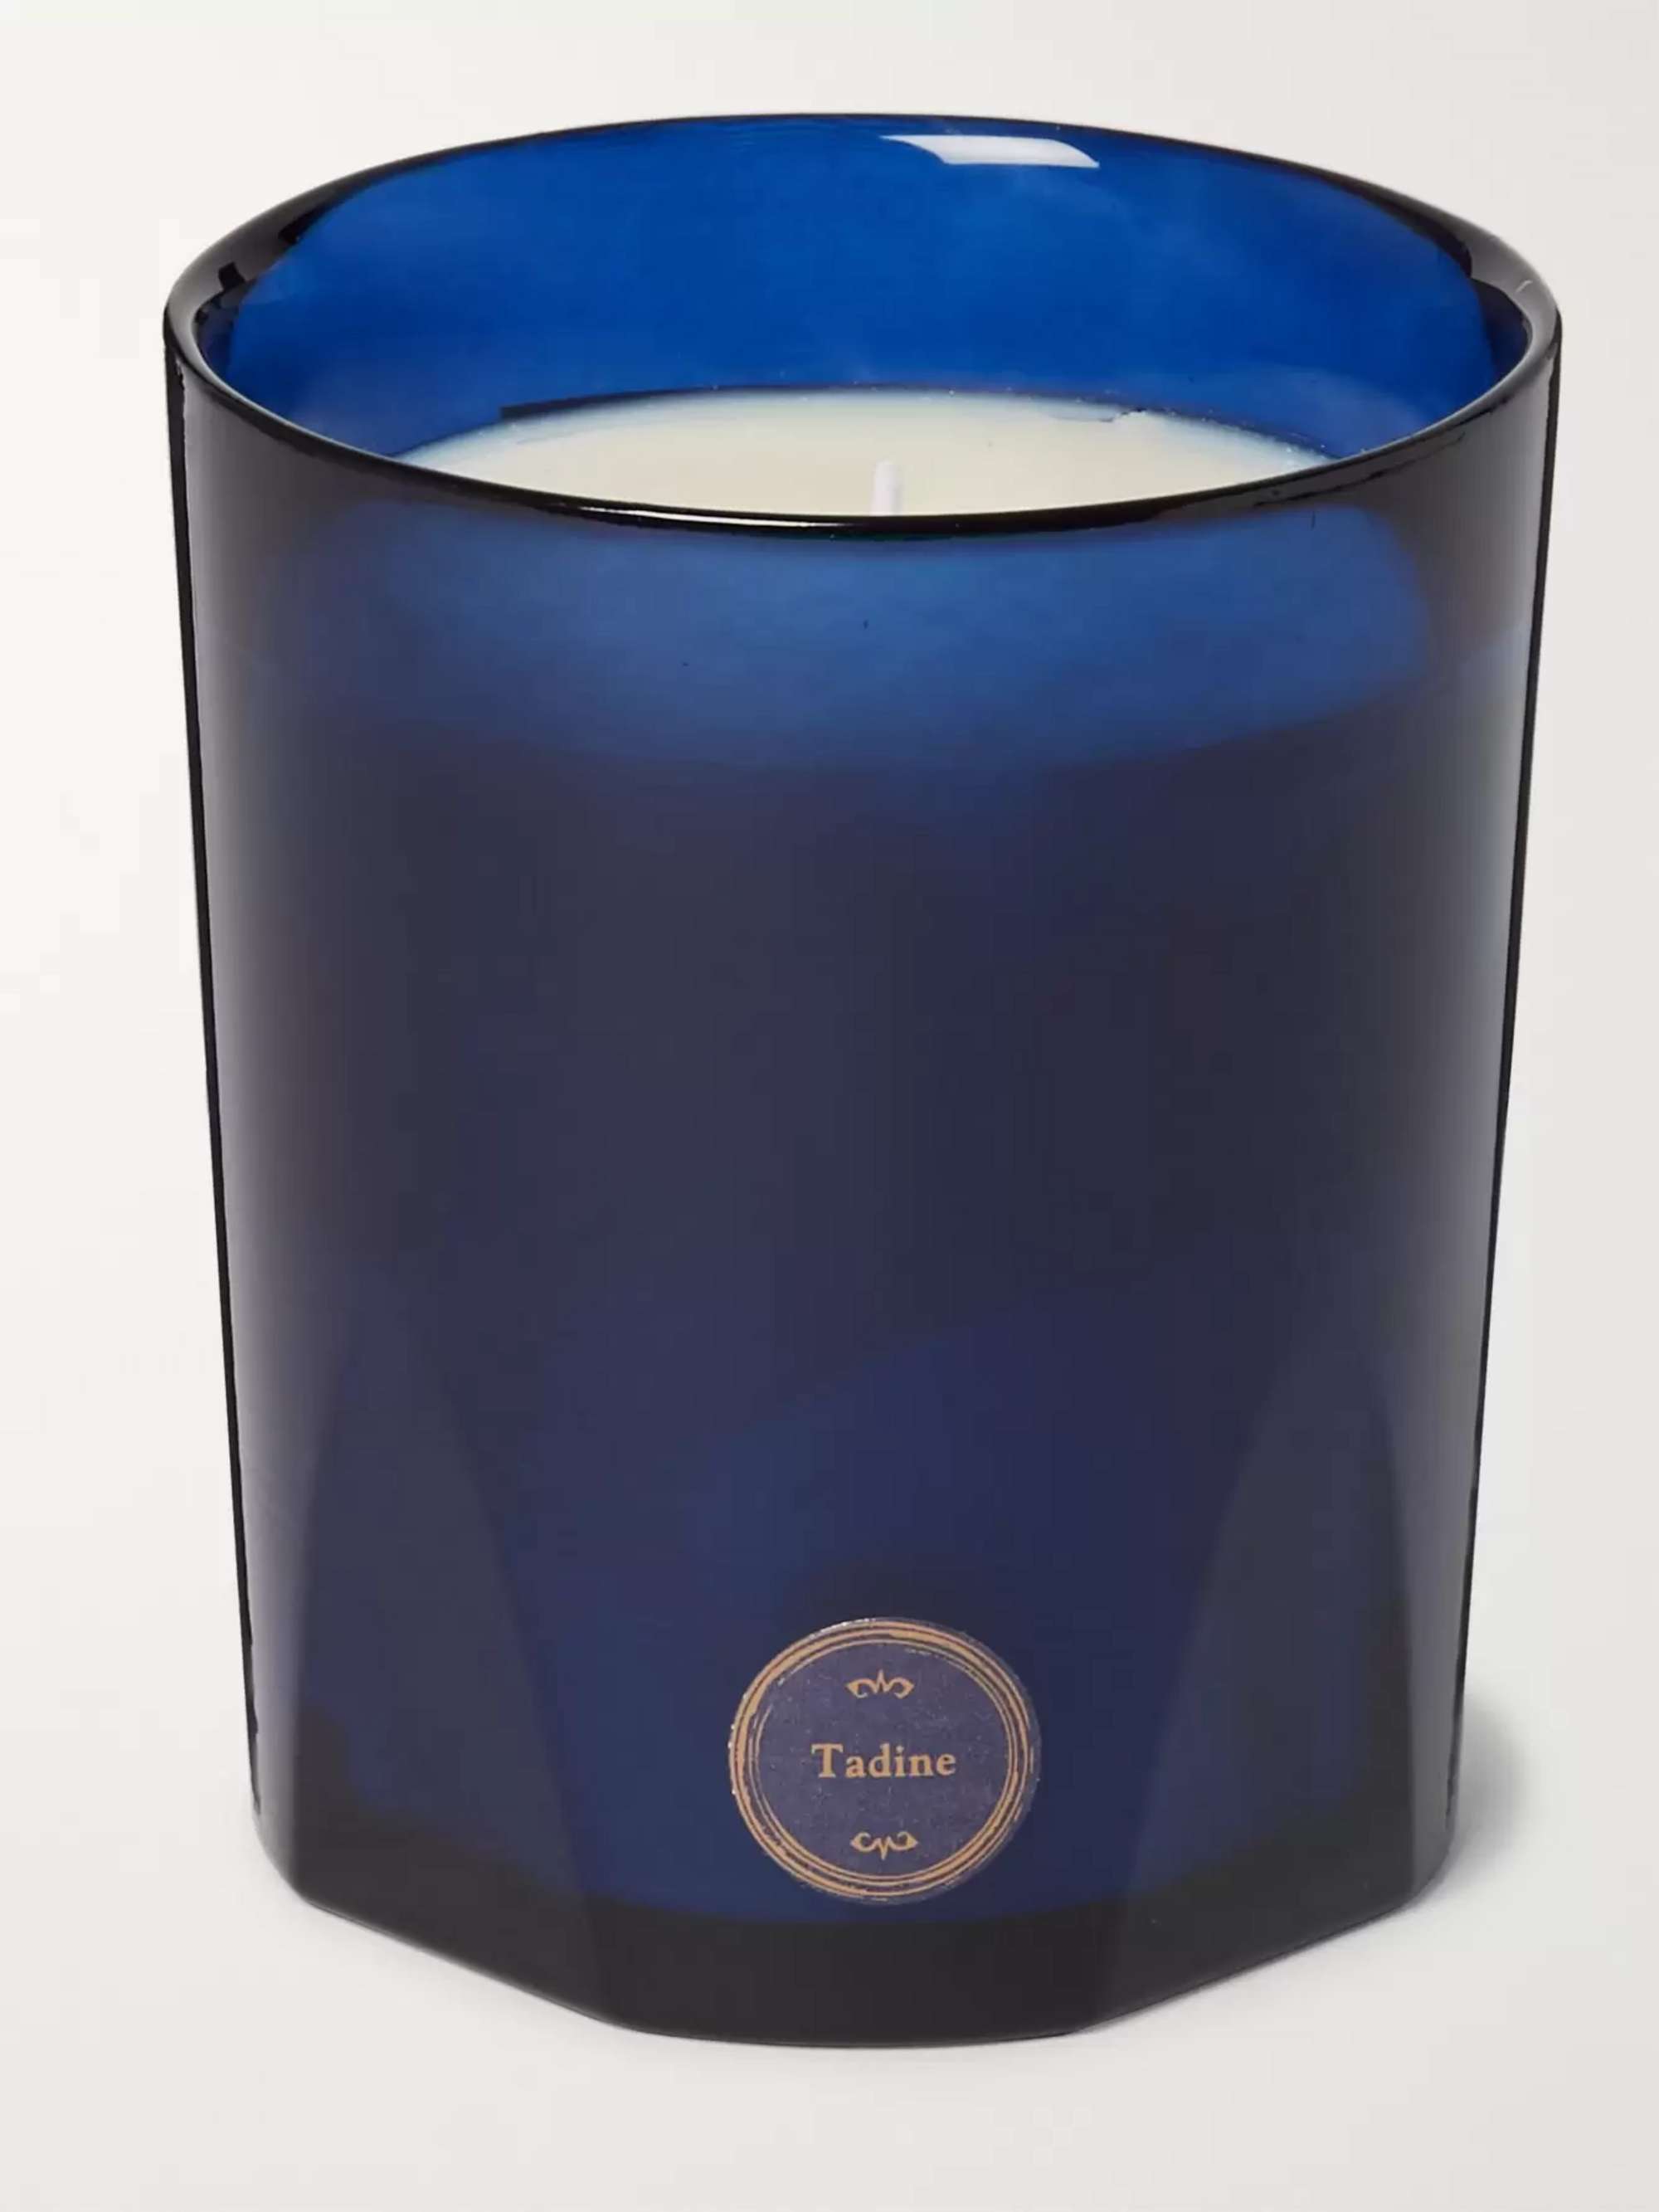 TRUDON Tadine Scented Candle, 270g